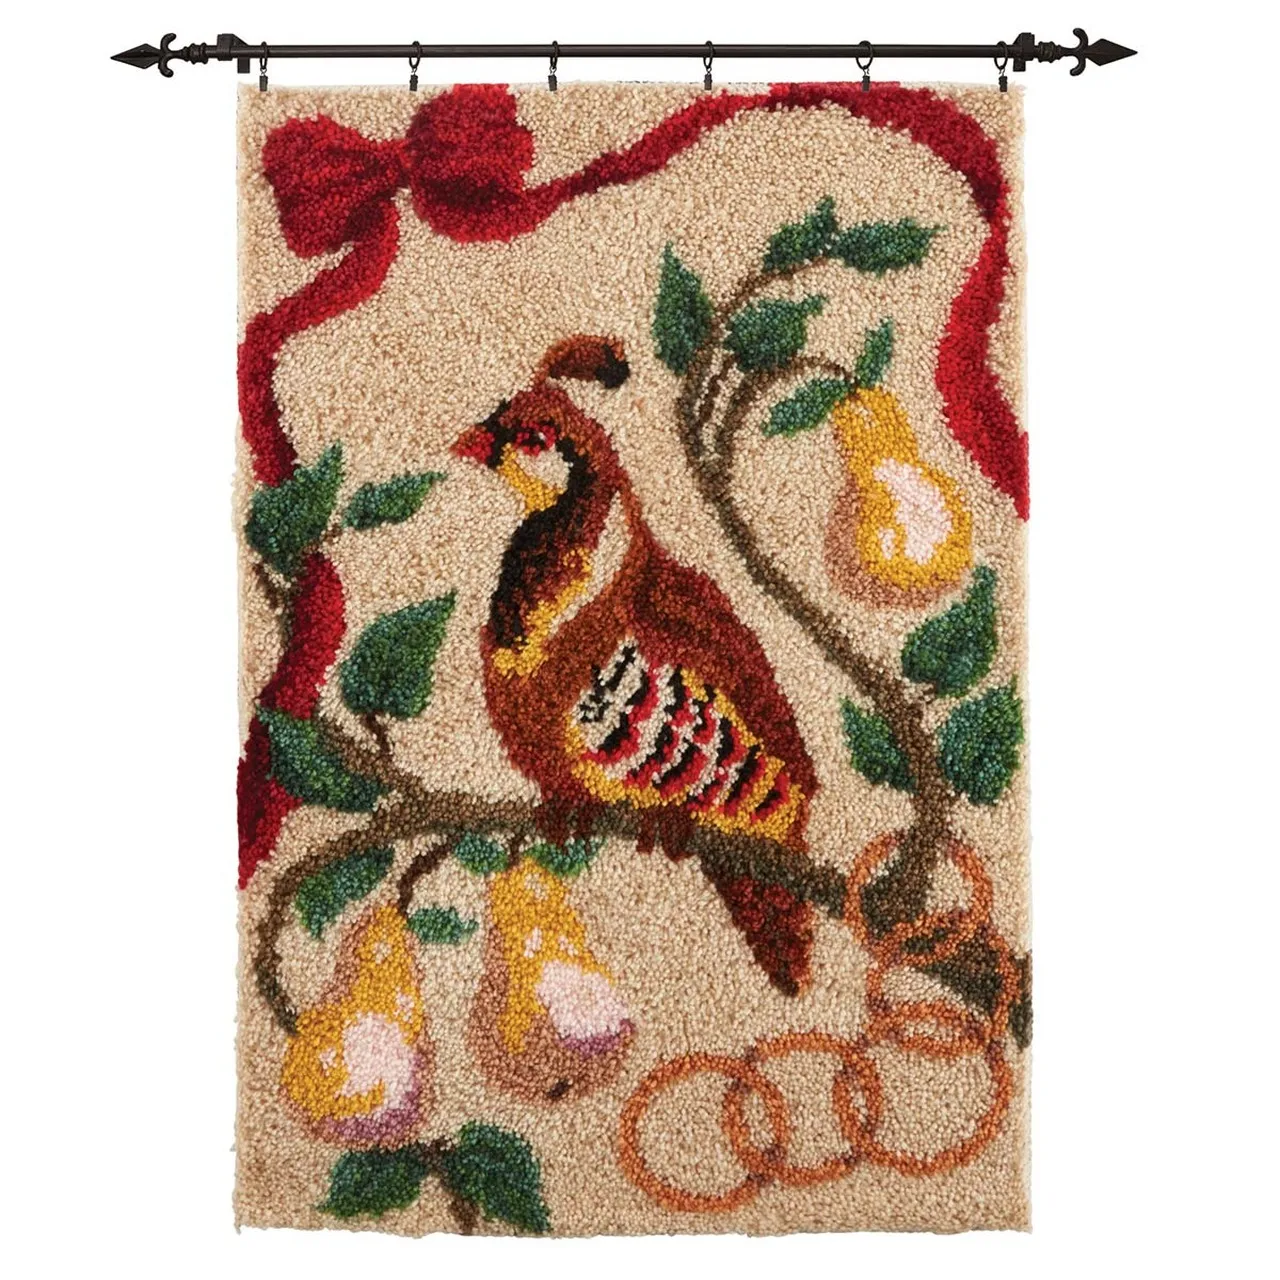 

Latch Hook Rug A Partridge in a Pear Tr Wall Tapestry DIY Carpet Rug Pre-Printed Canvas with Non-Skid Backing Floor Mat 69x102cm